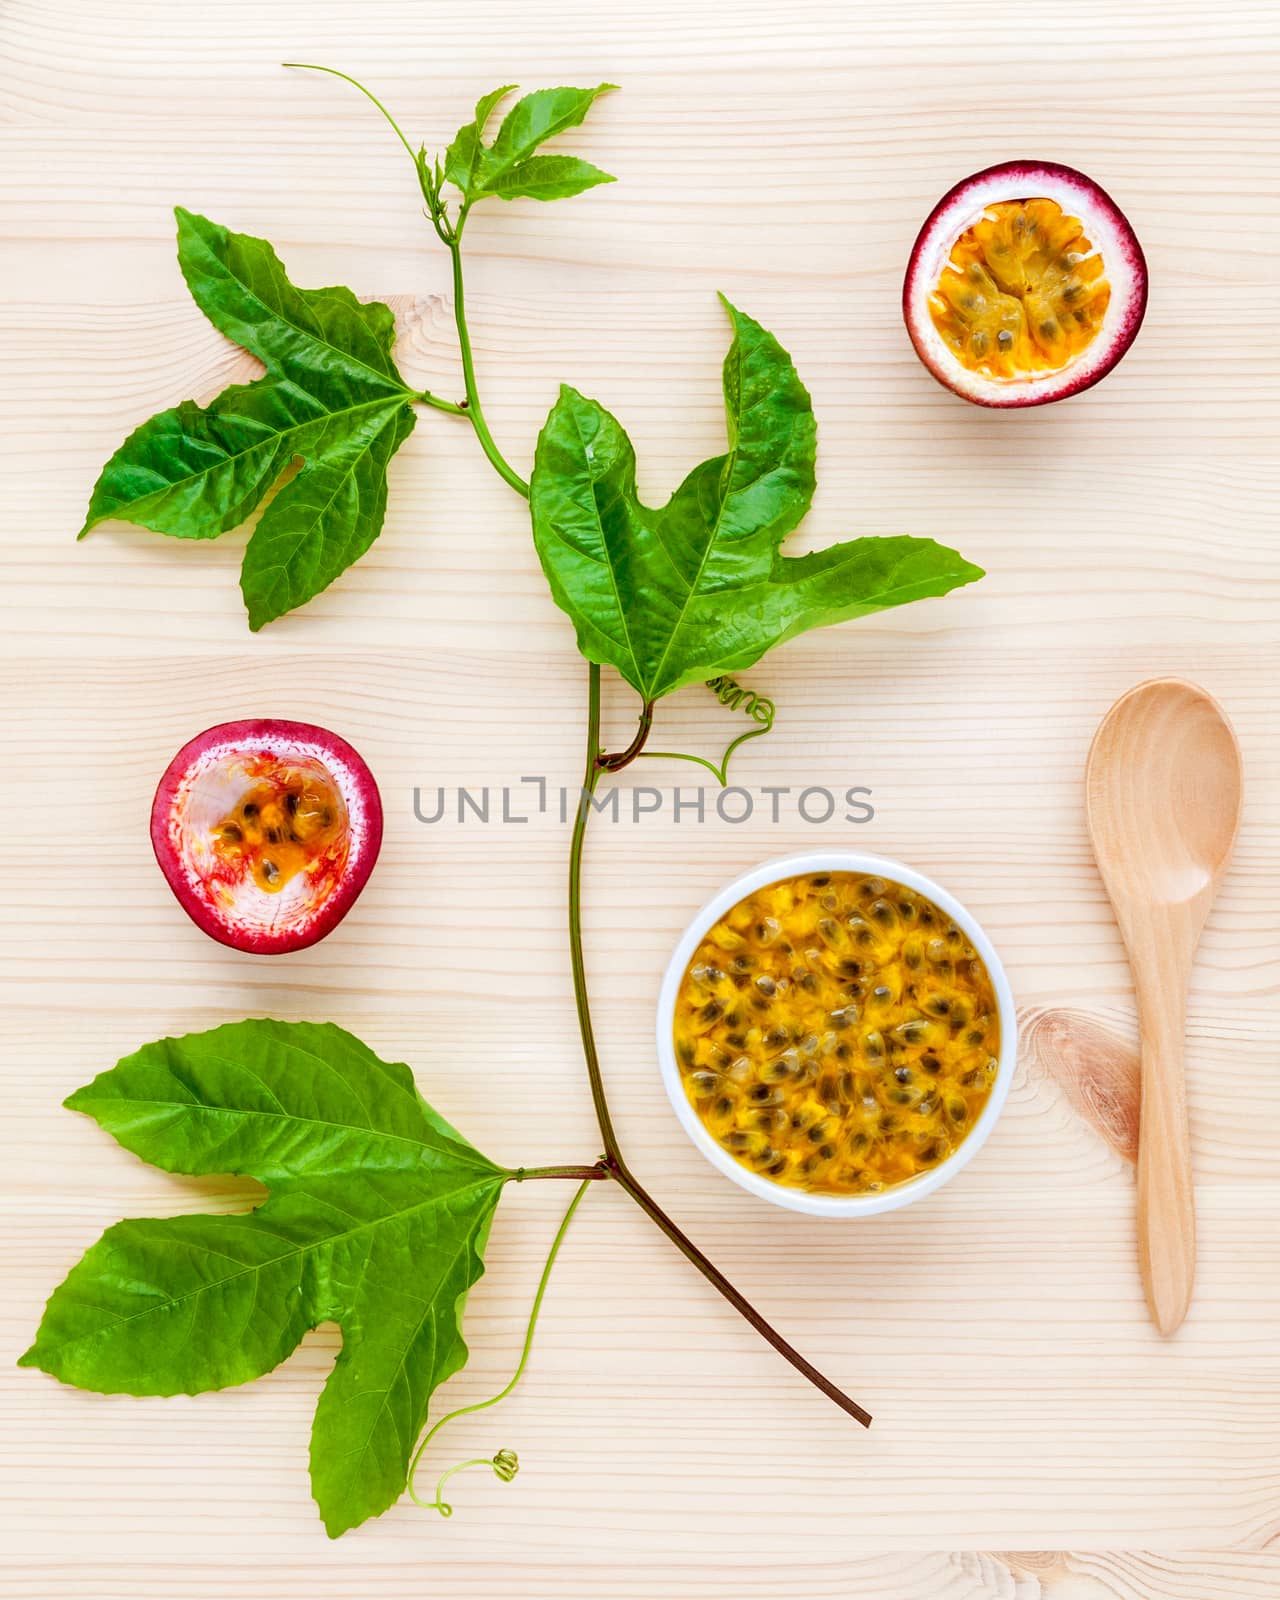 Fresh passion fruits set up on wooden background. Juicy passion fruits with green leaves  and Passion fruit vine flat lay .